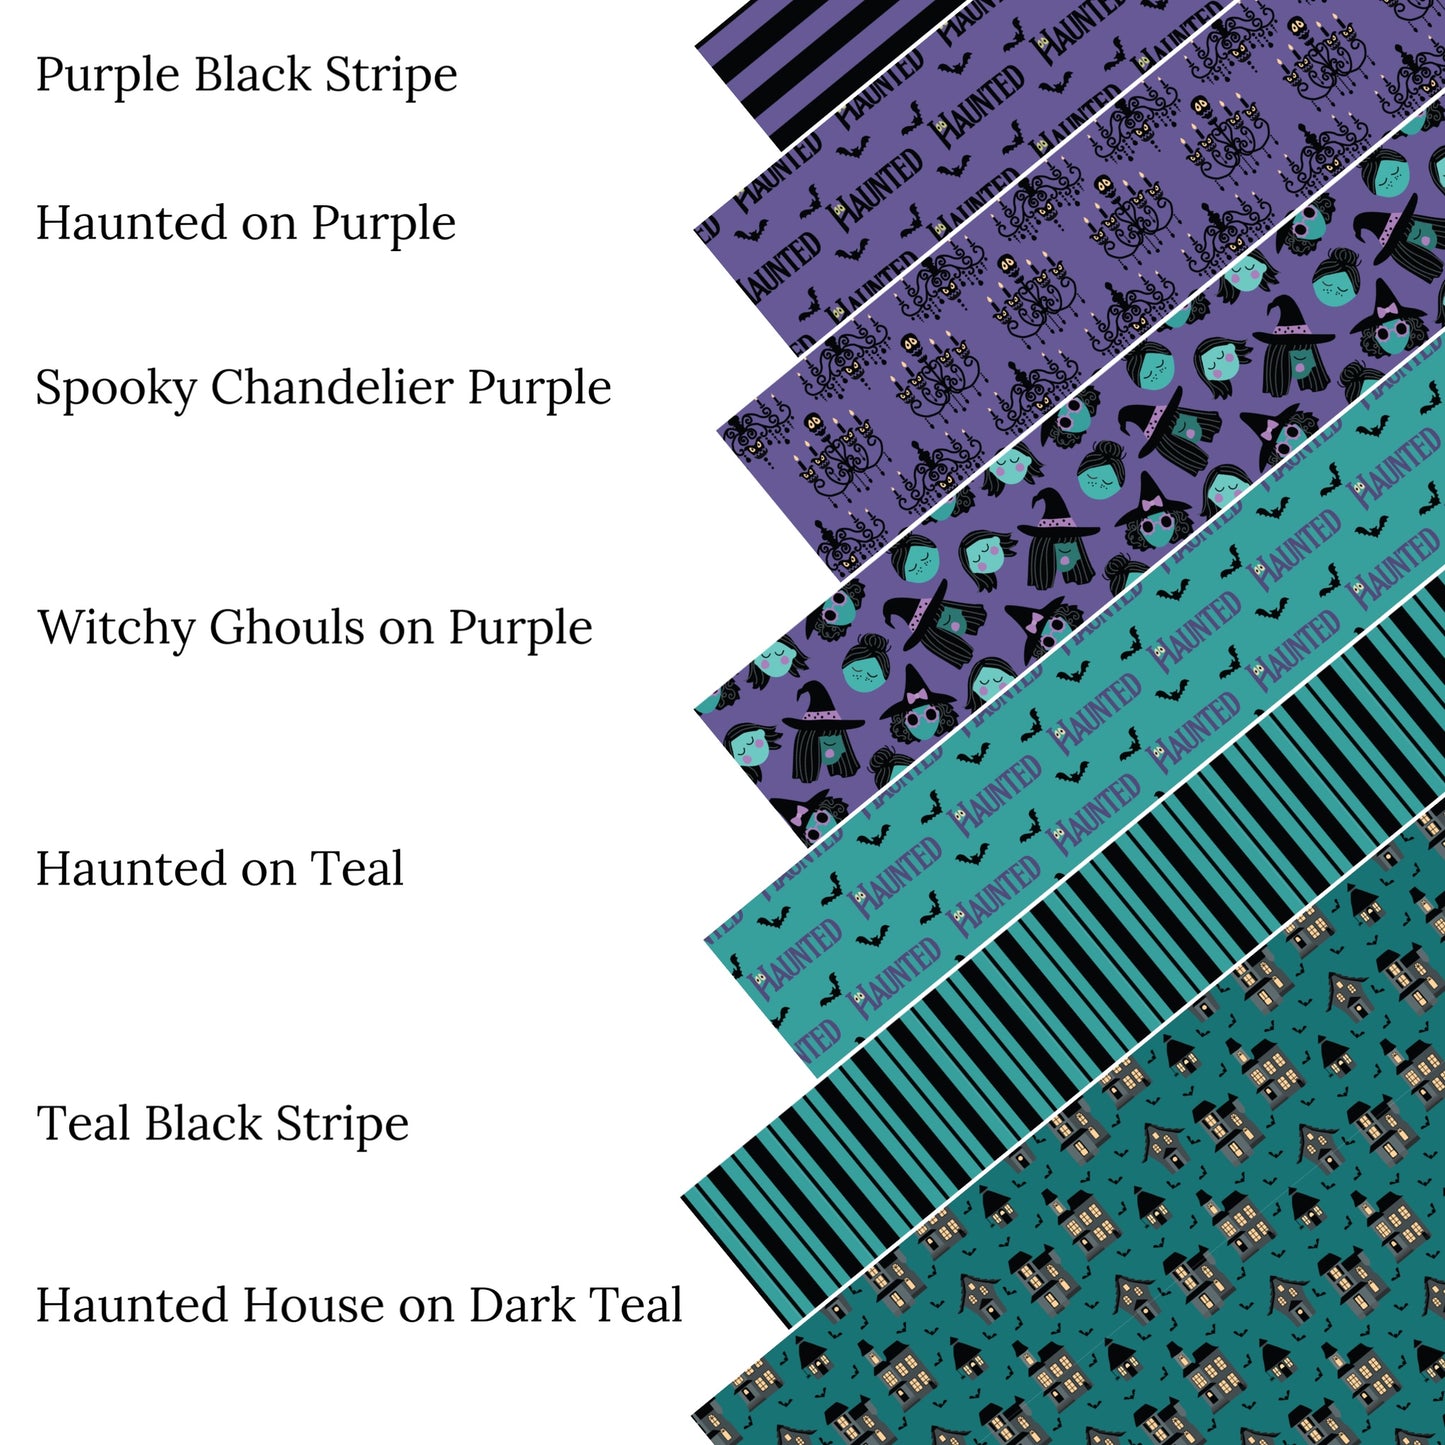 Haunted on Teal Faux Leather Sheets